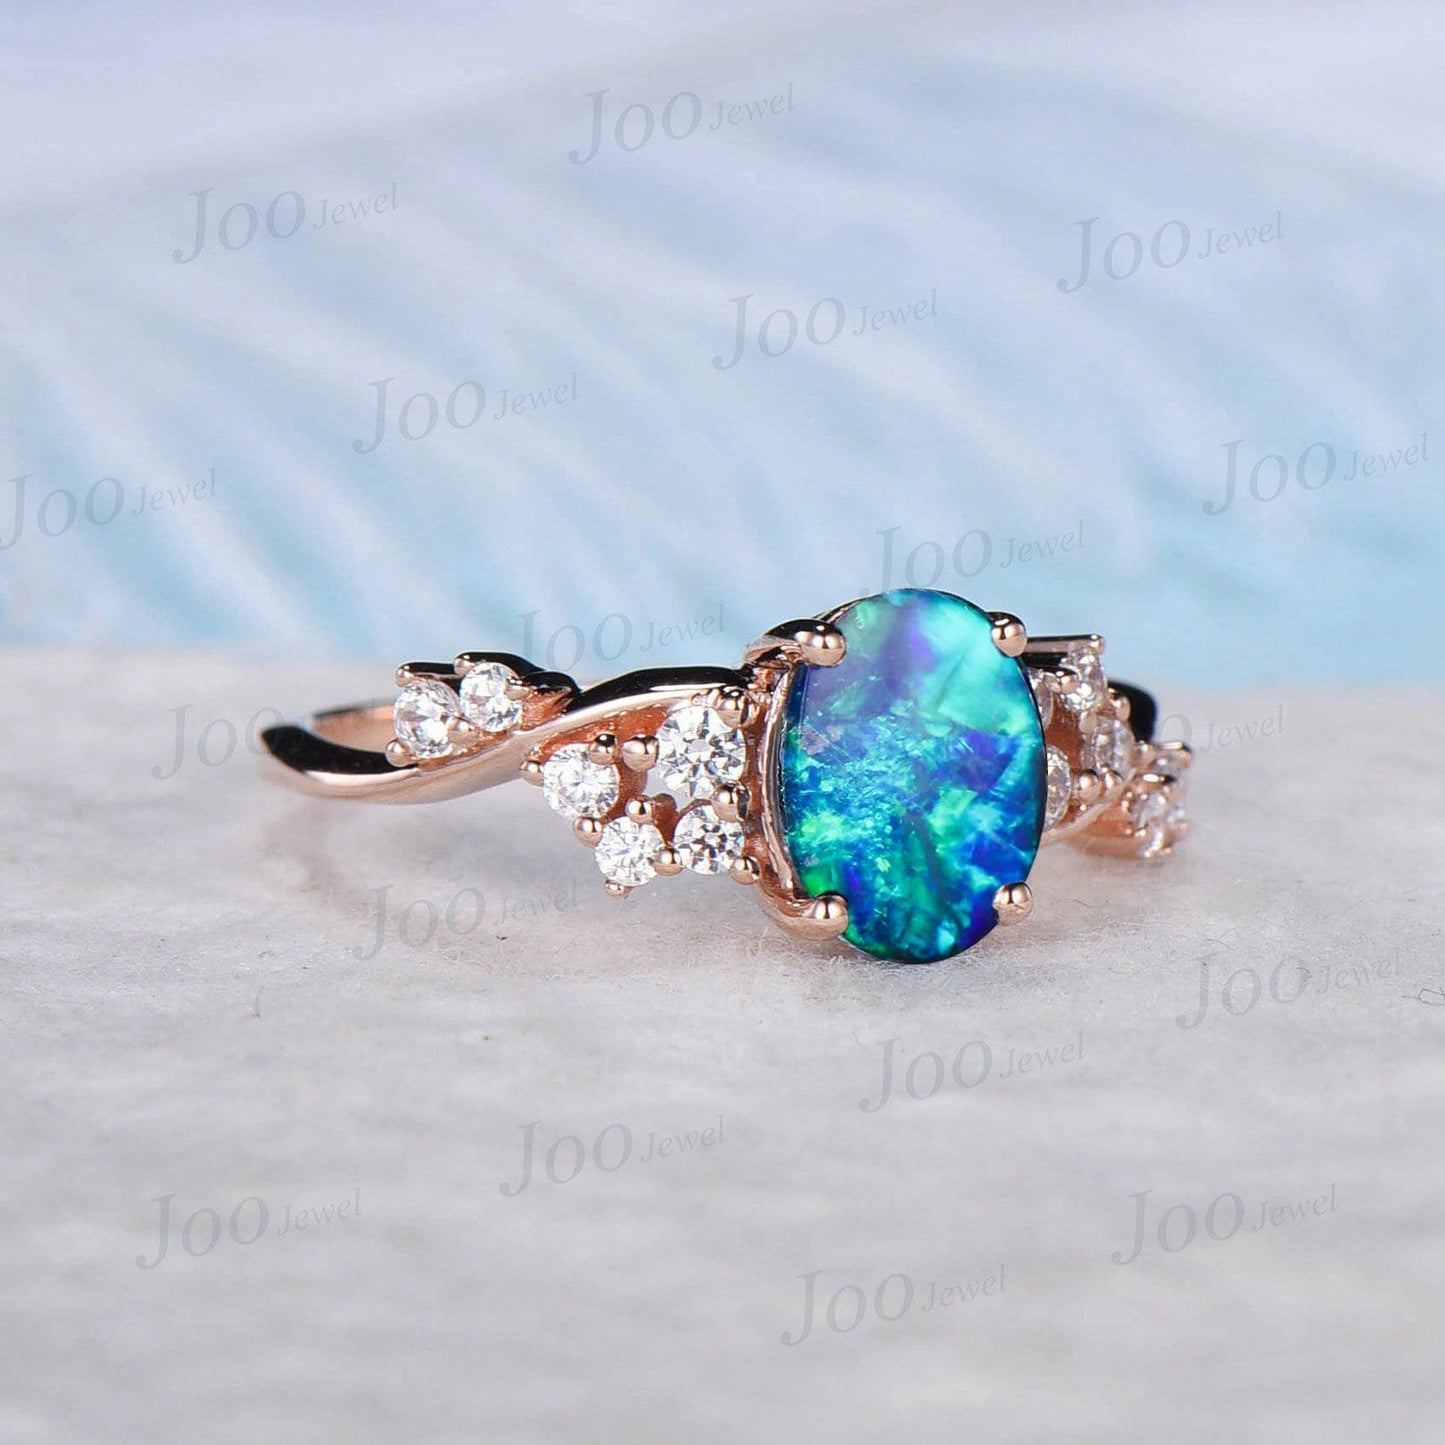 1.5ct Oval Blue Opal Engagement Ring Vintage Rose Gold Cluster Moissanite Wedding Ring Anniversary Gift Galaxy Blue Fire Opal Promise Rings